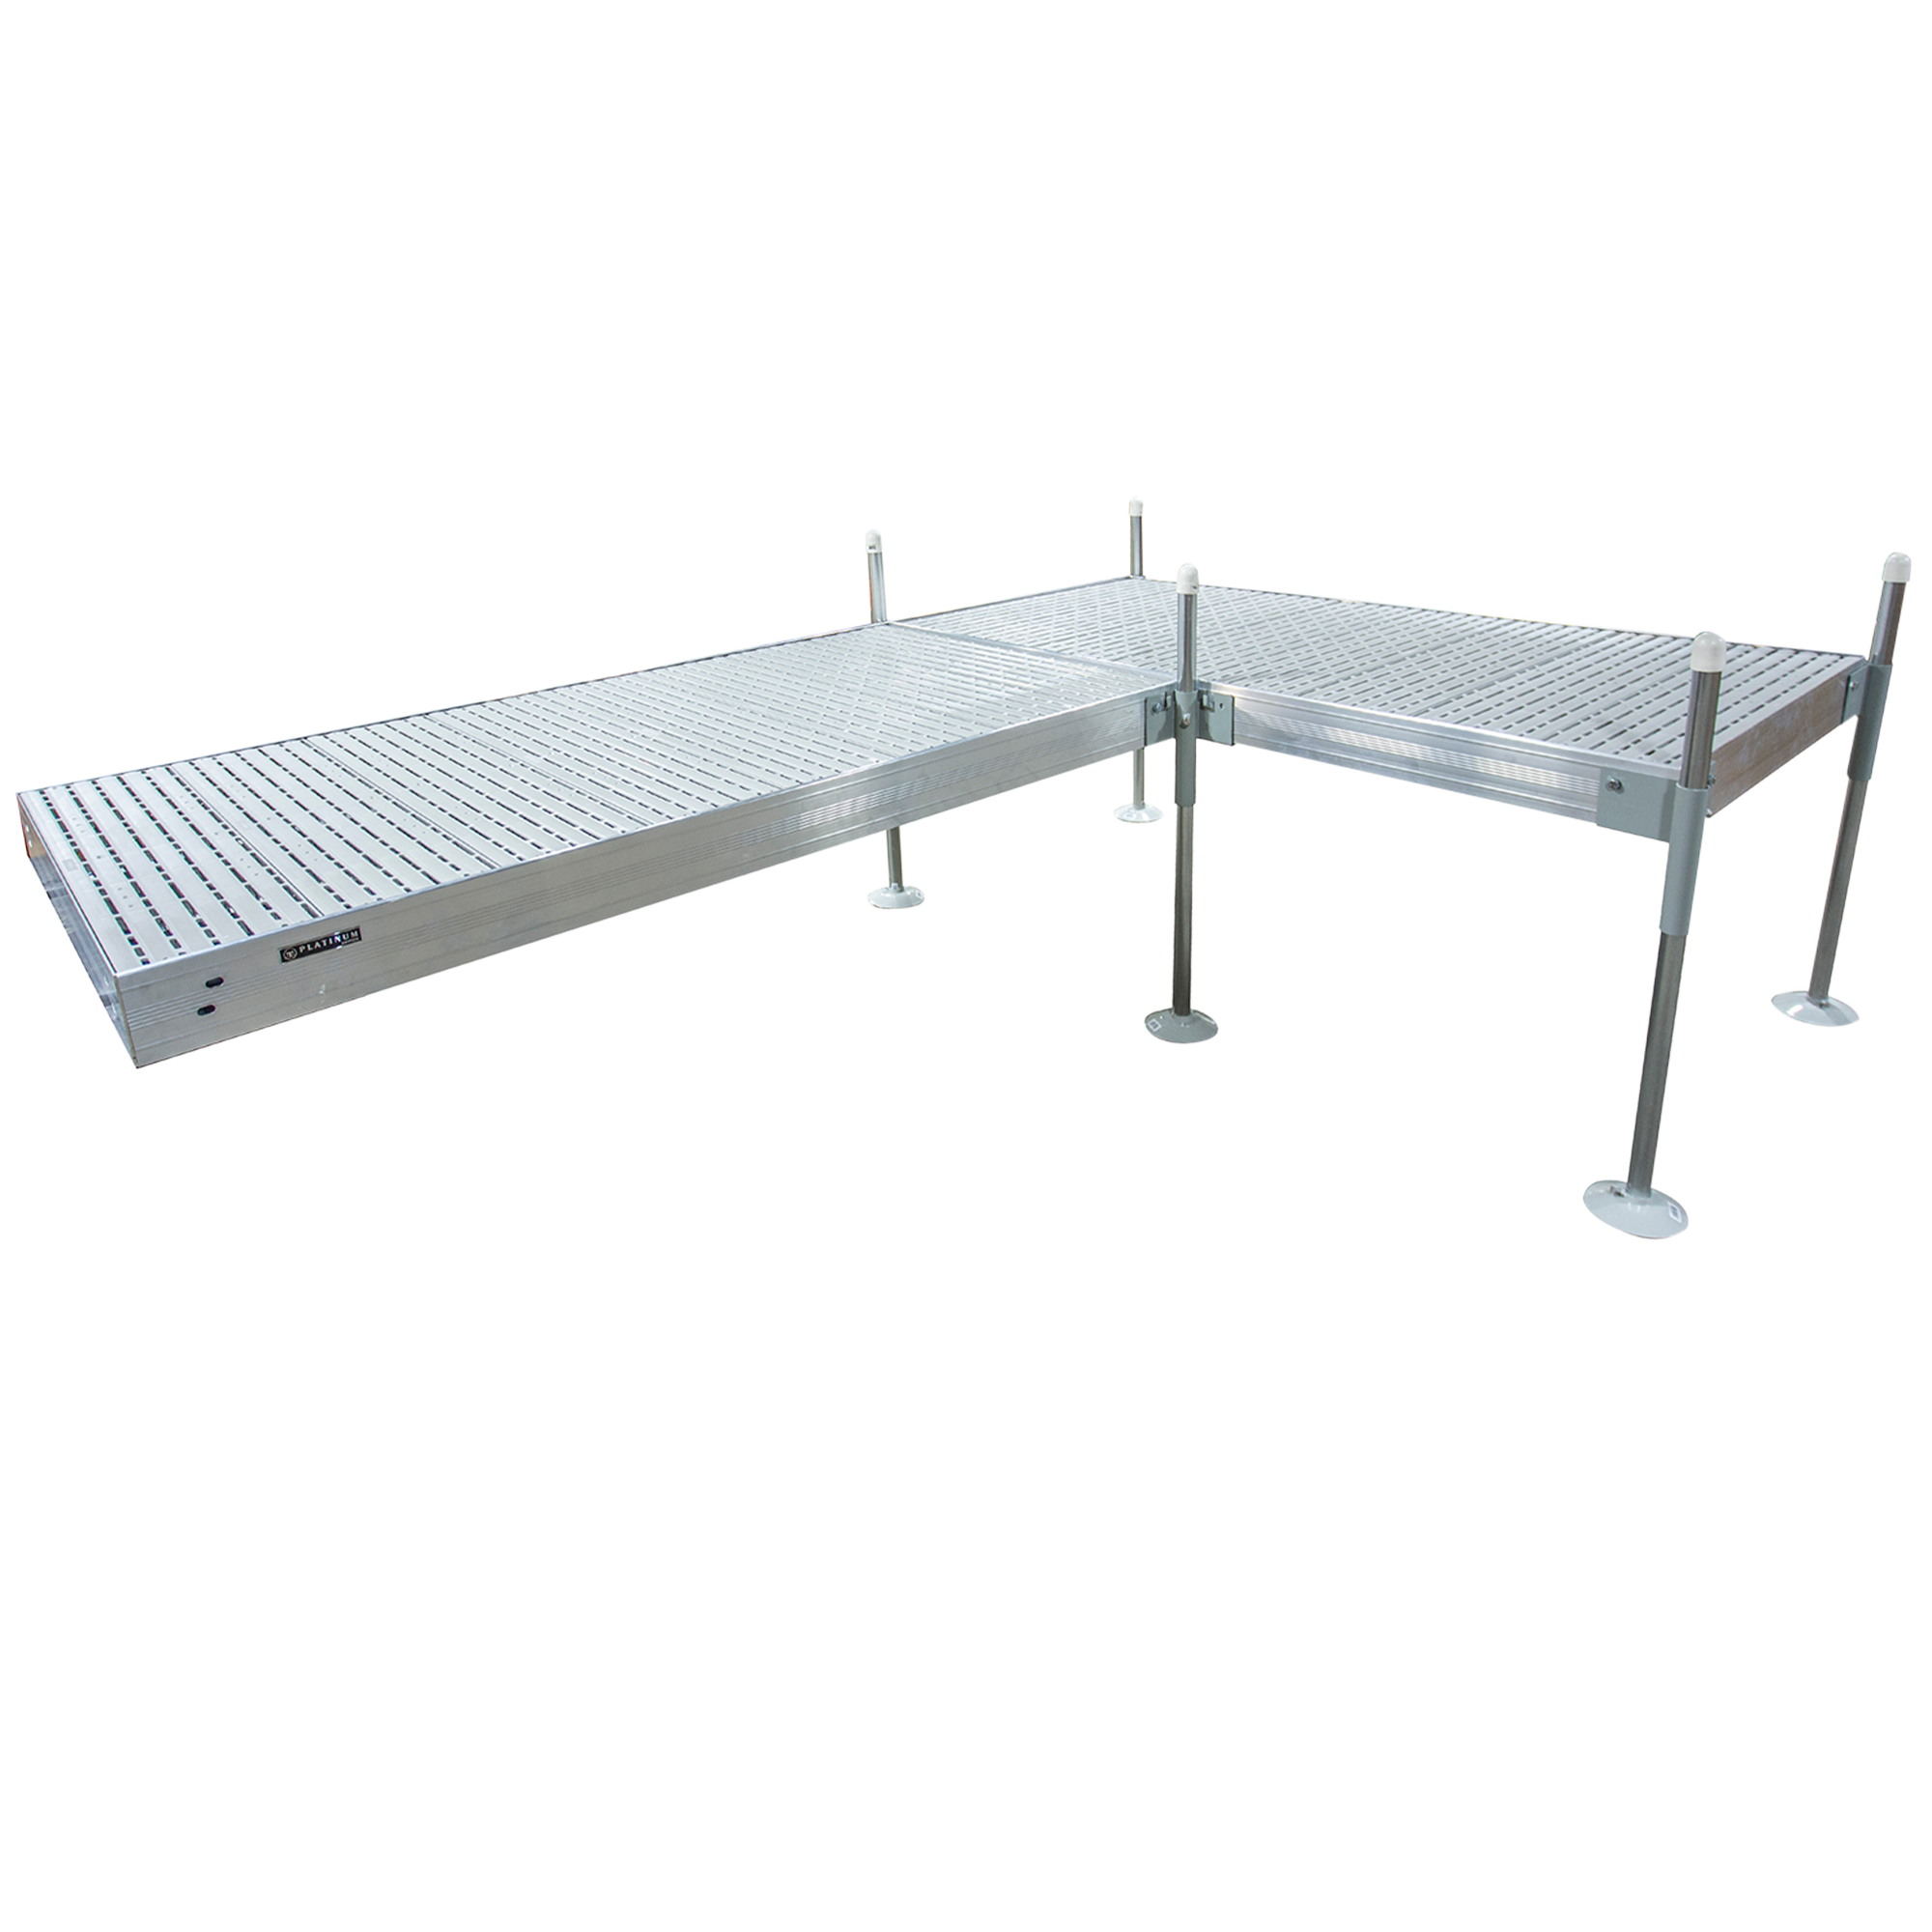 12' L-Shaped Boat Dock System with Aluminum Frame and Gray Titan Decking